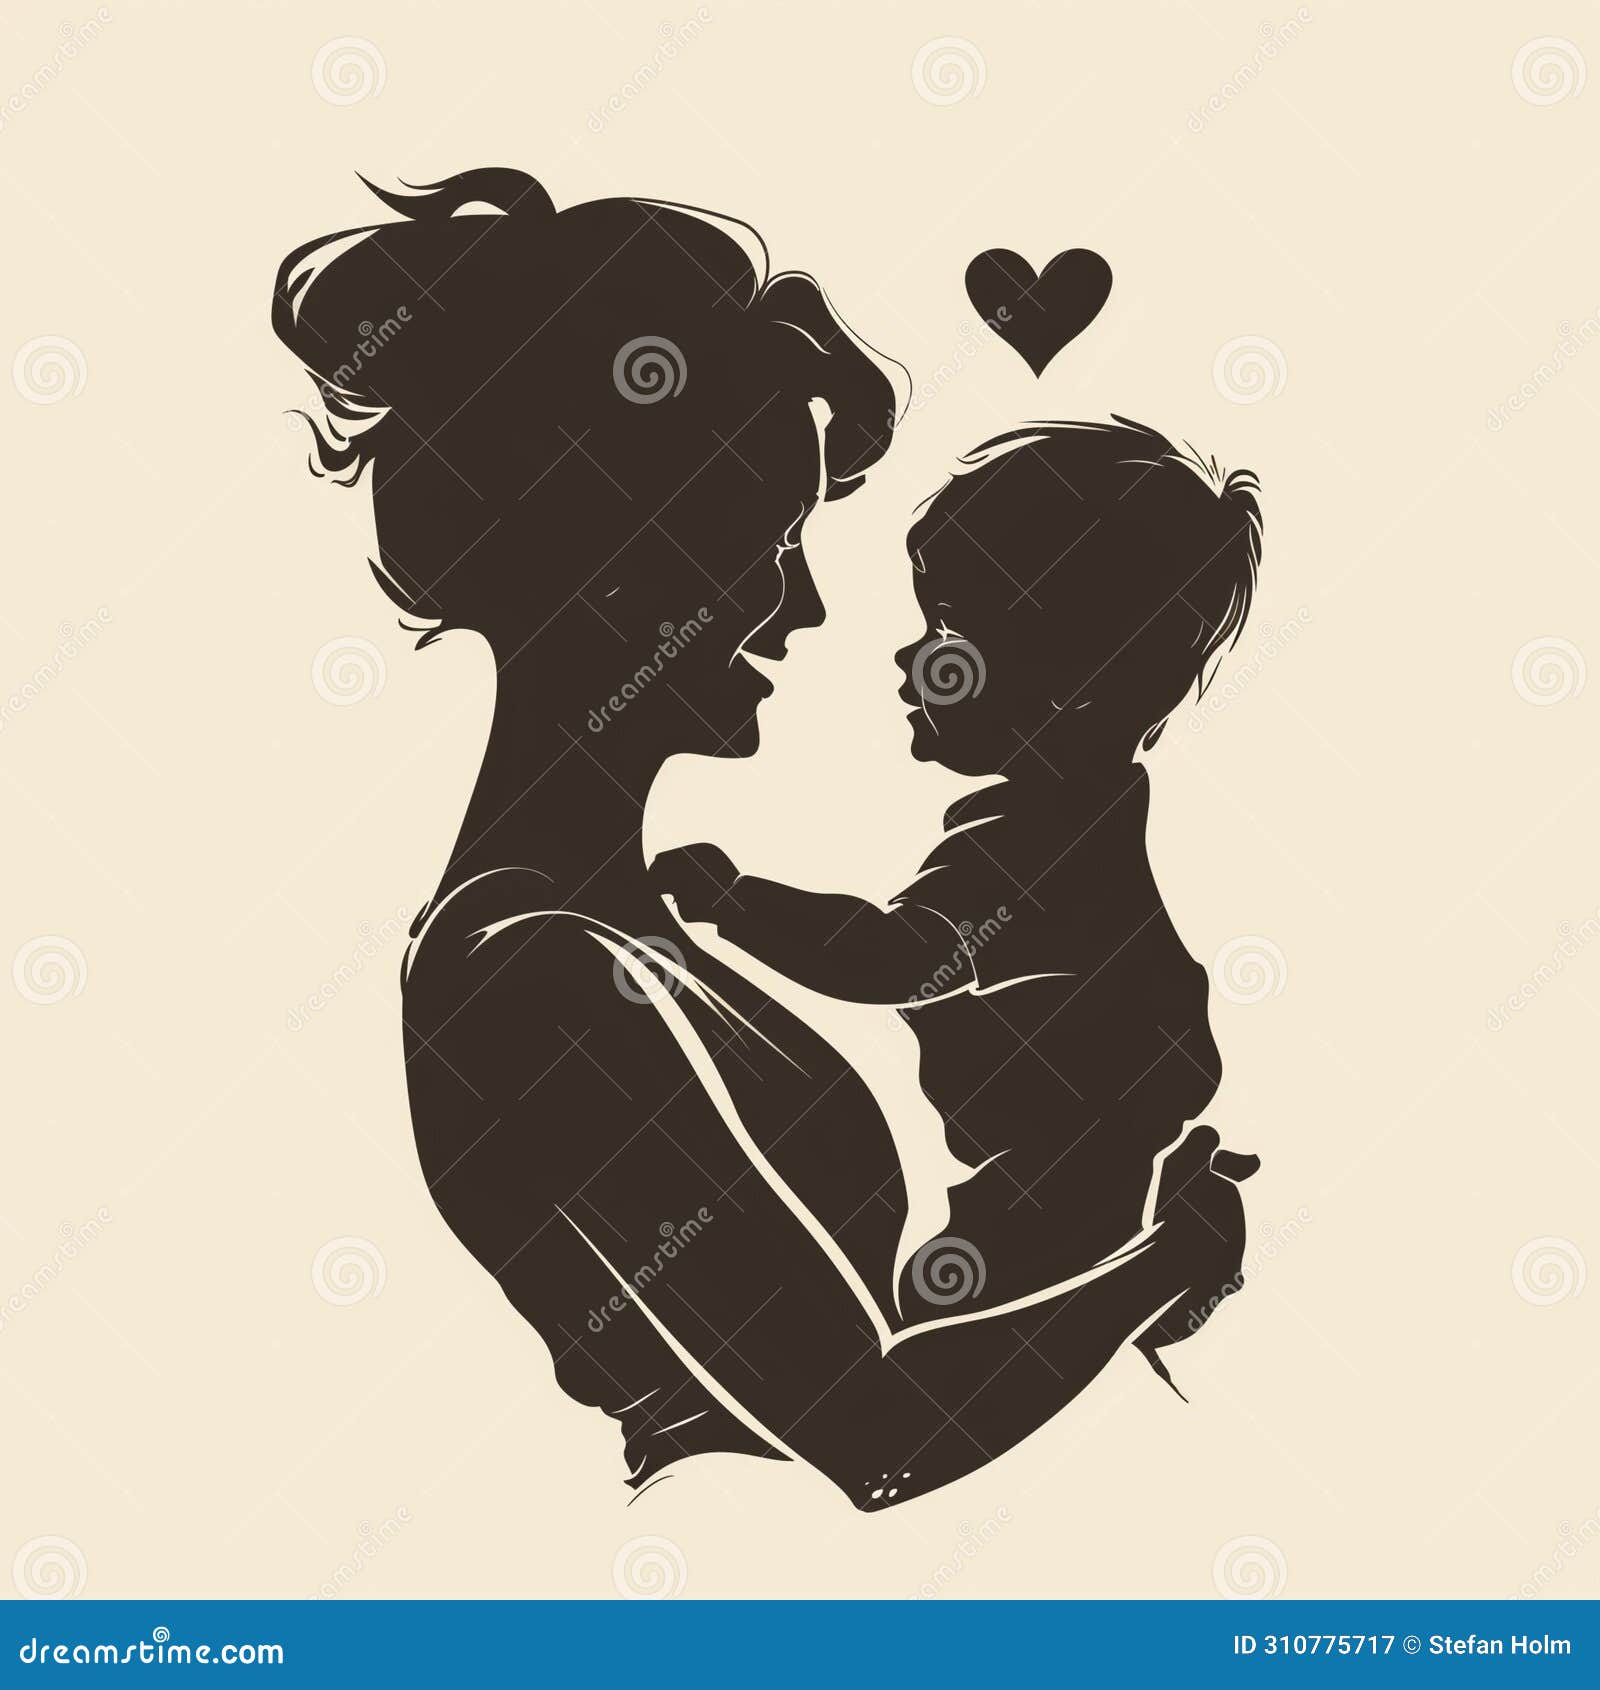 simple silhouette for mother's day universally recognizable elegant image that evokes the essence of motherhood.